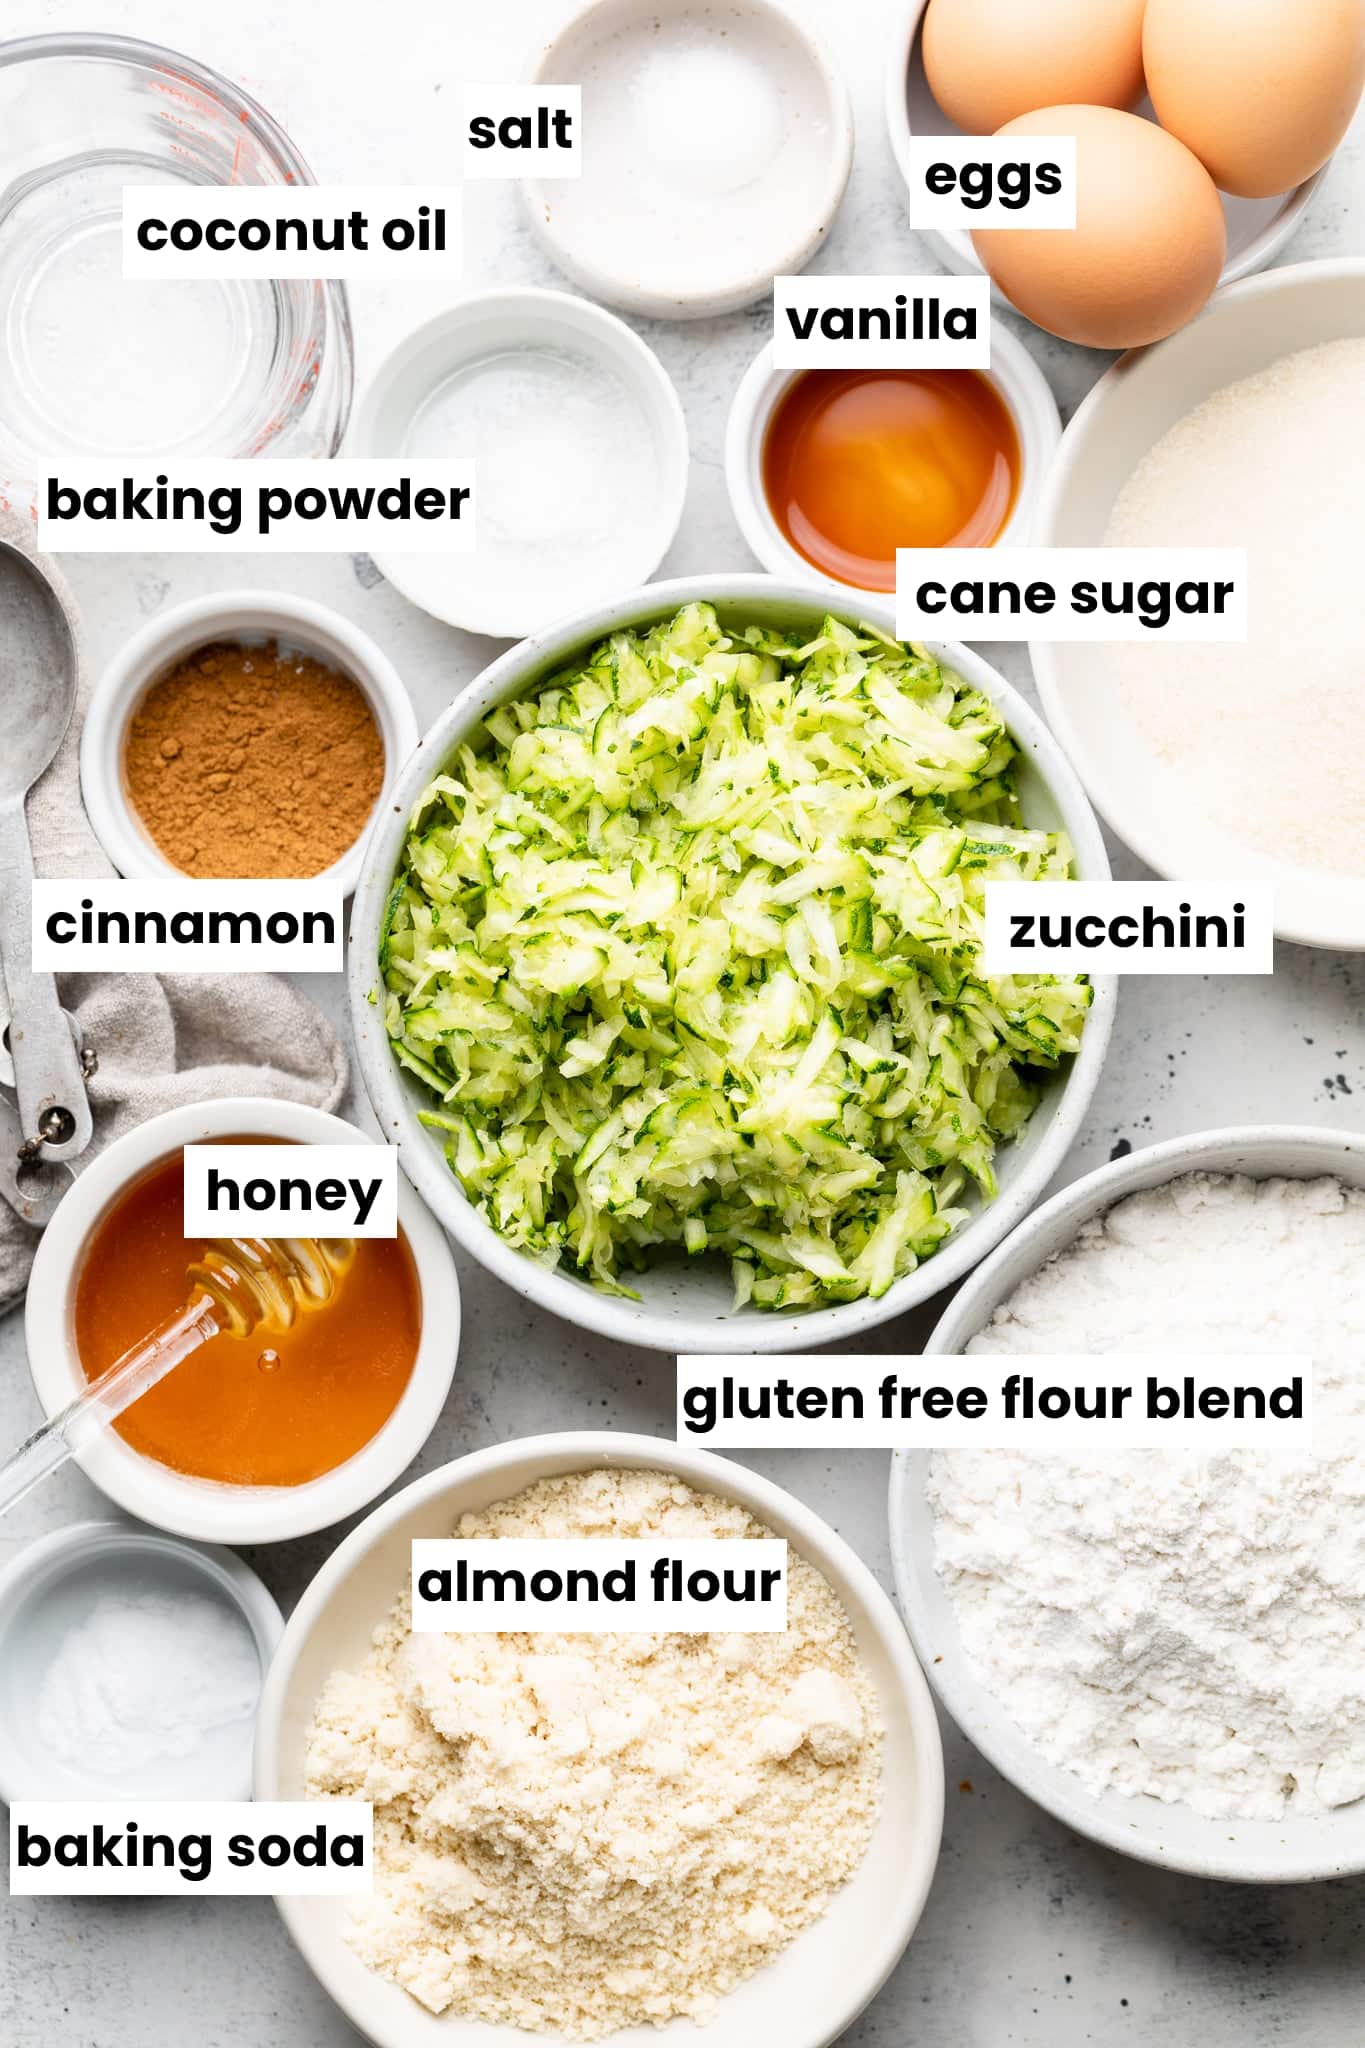 Ingredients for the zucchini bread, including zucchini, honey, gluten free flour, coconut oil, and spices.